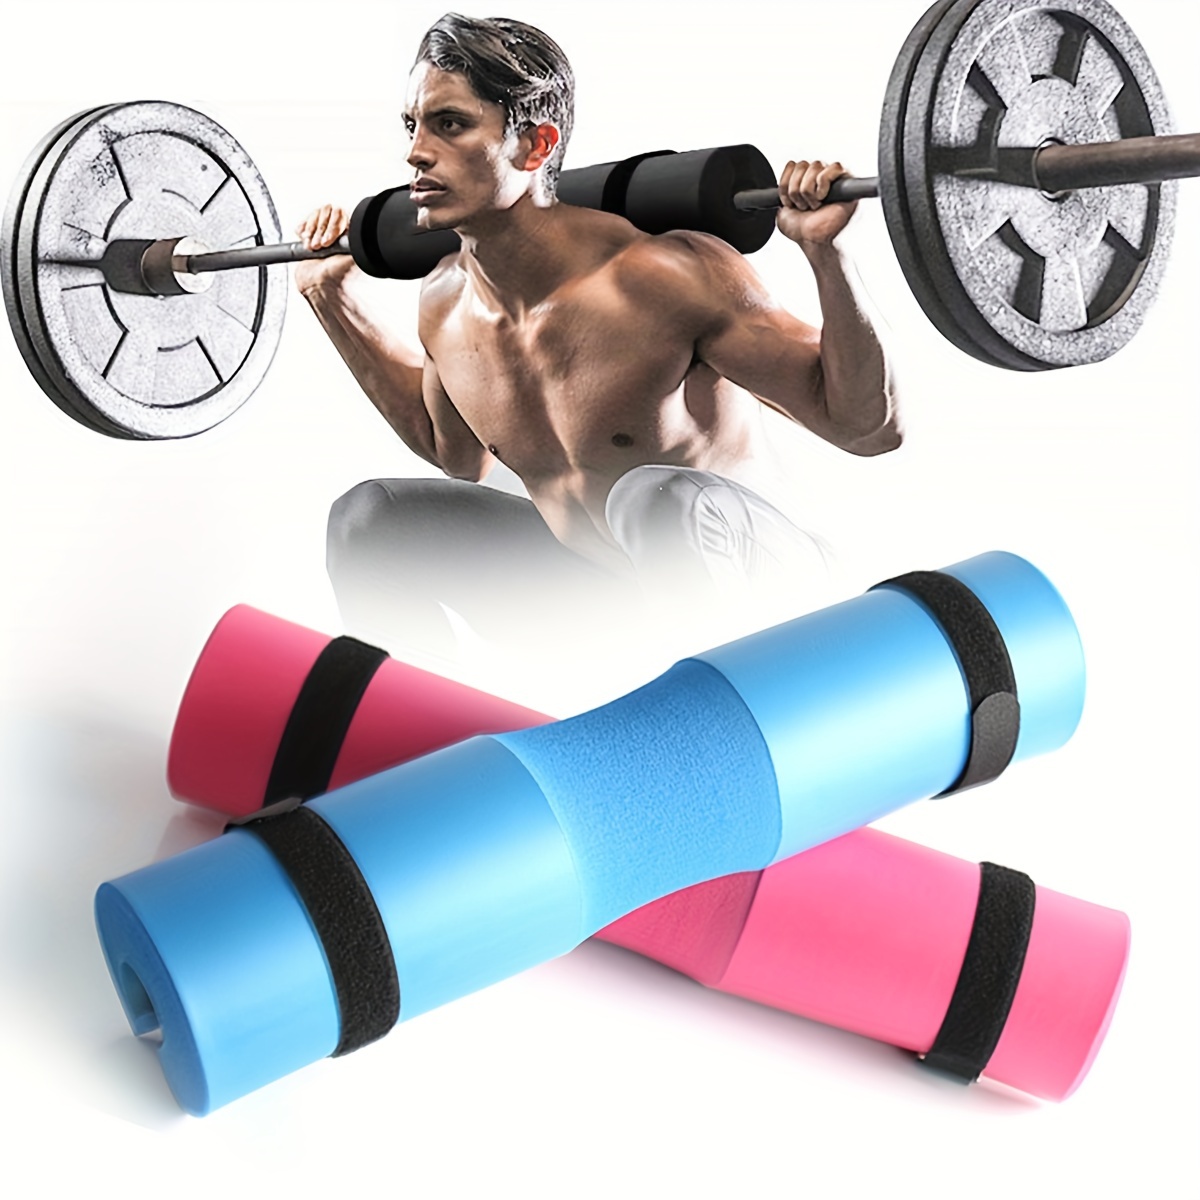 Buy Tima Barbell Pad- Squat Pad for Squats, Hip Thrusts & Lunges